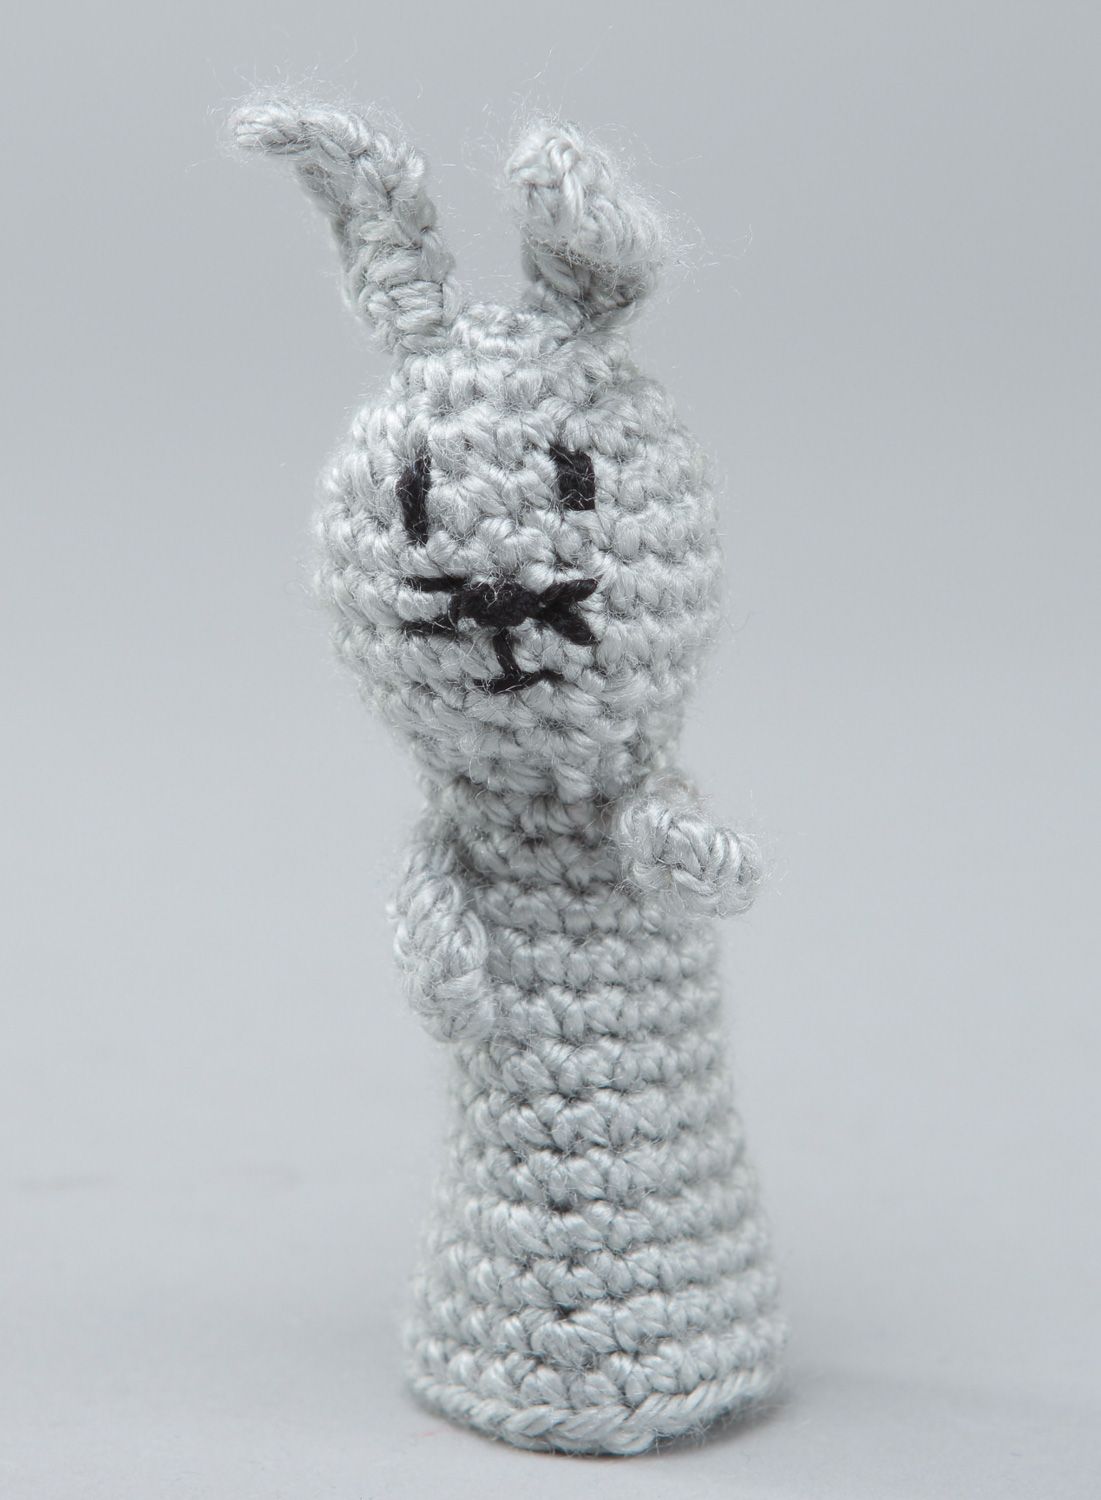 Handmade finger puppet in the shape of gray rabbit crocheted of acrylic threads photo 1